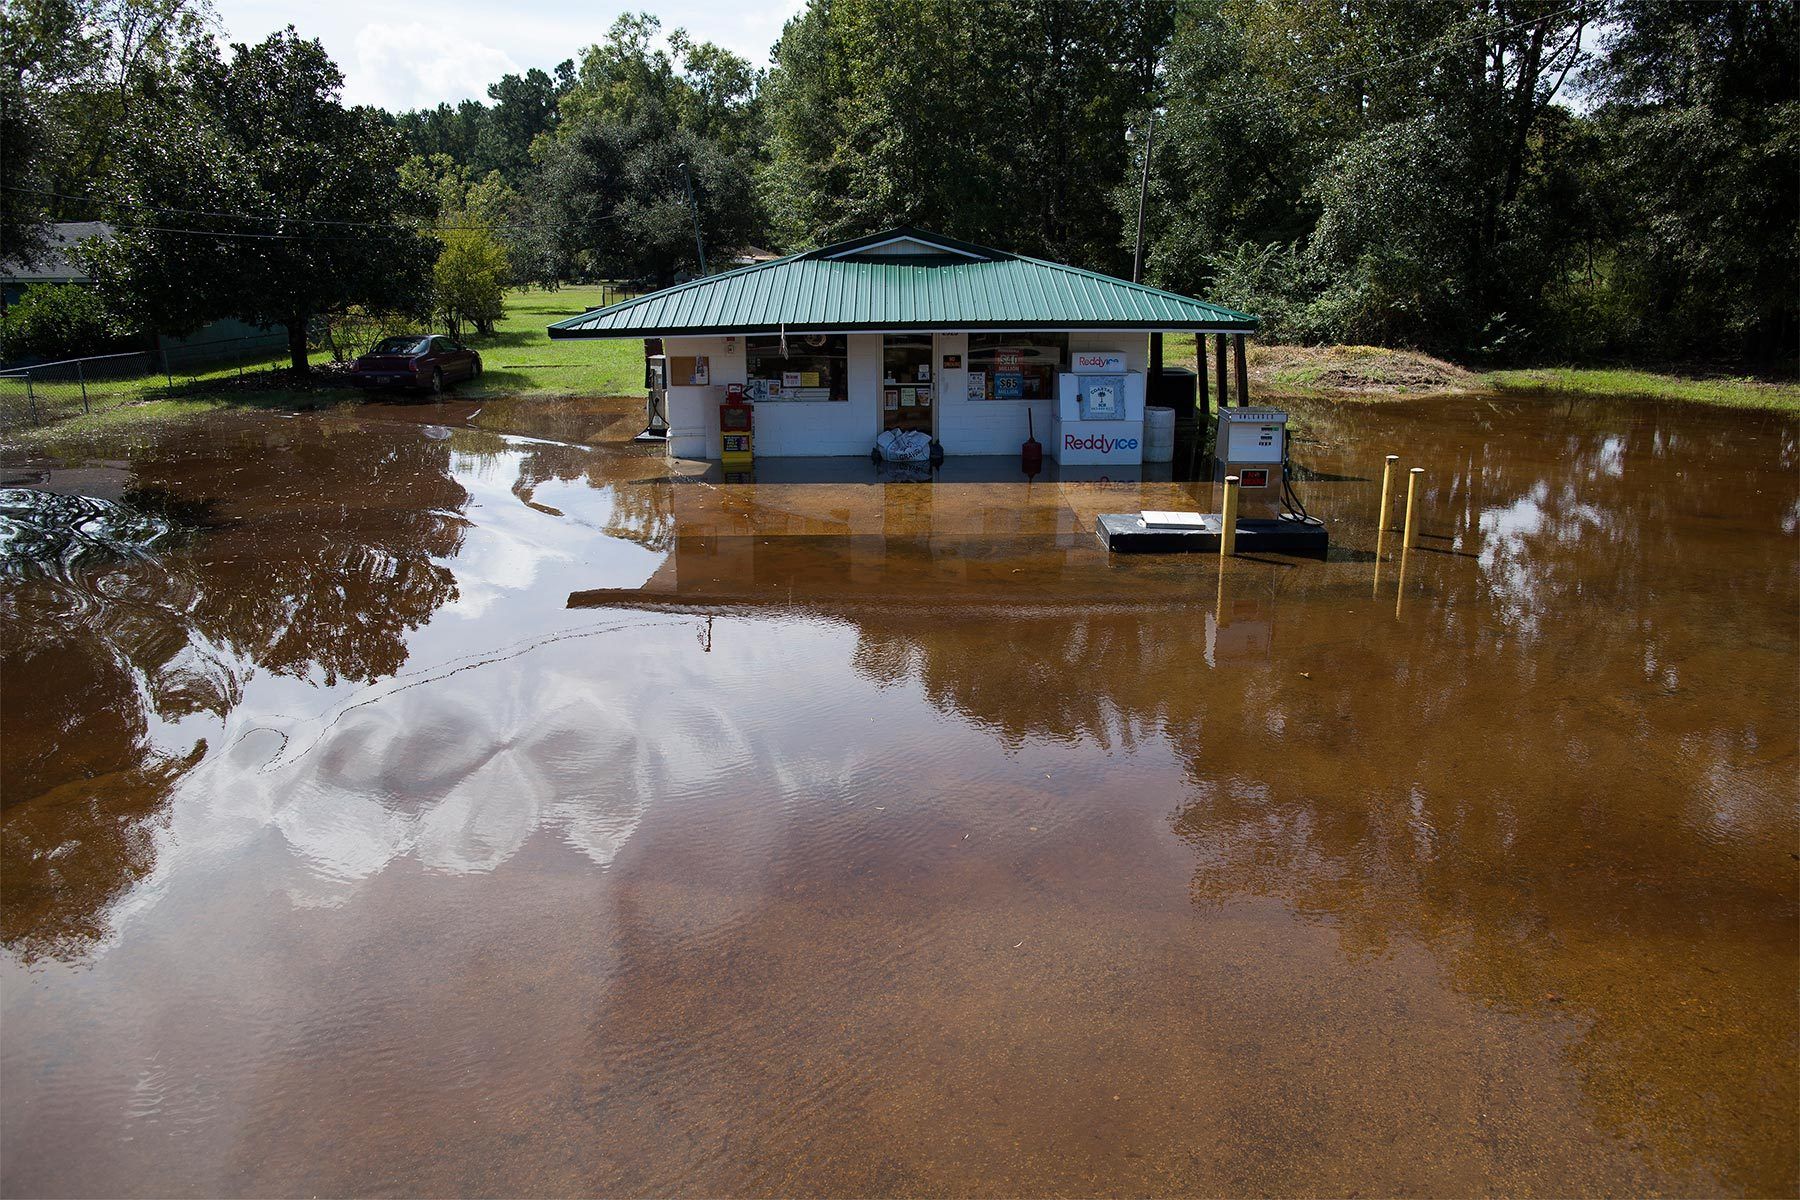 A community store in the Dunbar Community is surrounded by water in Georgetown, South Carolina October 9, 2015. Concerns about additional inundation in four coastal counties and more rain had officials on guard Friday, nine days after a state of emergency was declared because of historic rains that washed out roads, swamped hundreds of homes and killed 17 people in the state. Emergency management officials in several areas were encouraging residents to leave their homes as a precaution as floodwaters flow south into already-swollen rivers and tributaries toward the Atlantic Ocean.  REUTERS/Randall Hill